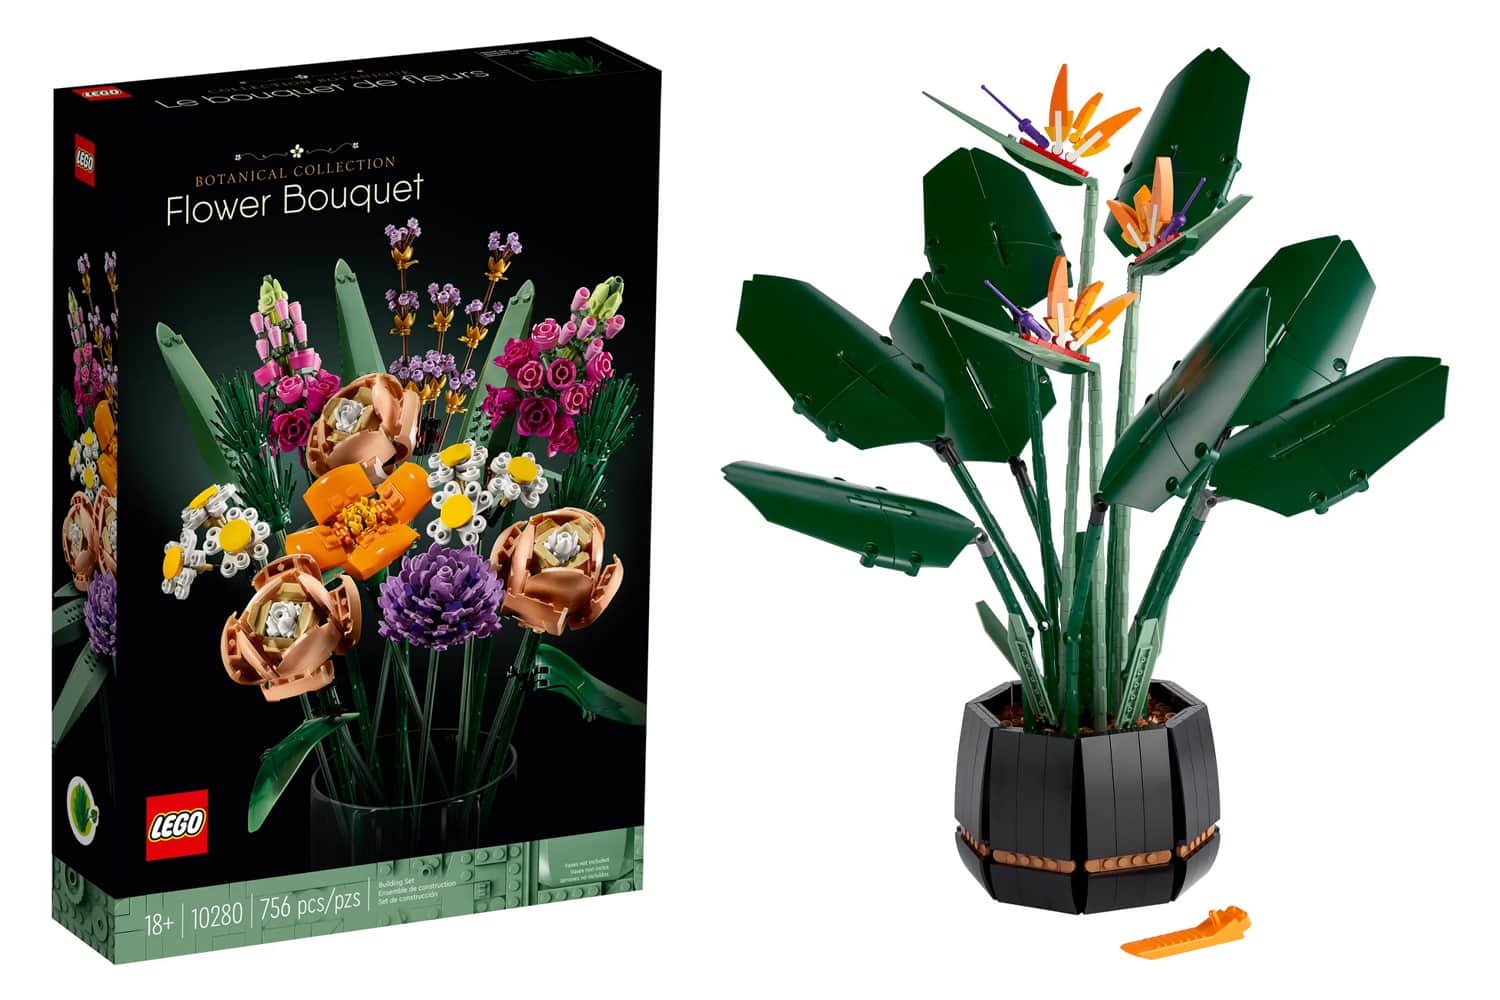 Your First Look at Lego's New Botanical Collection